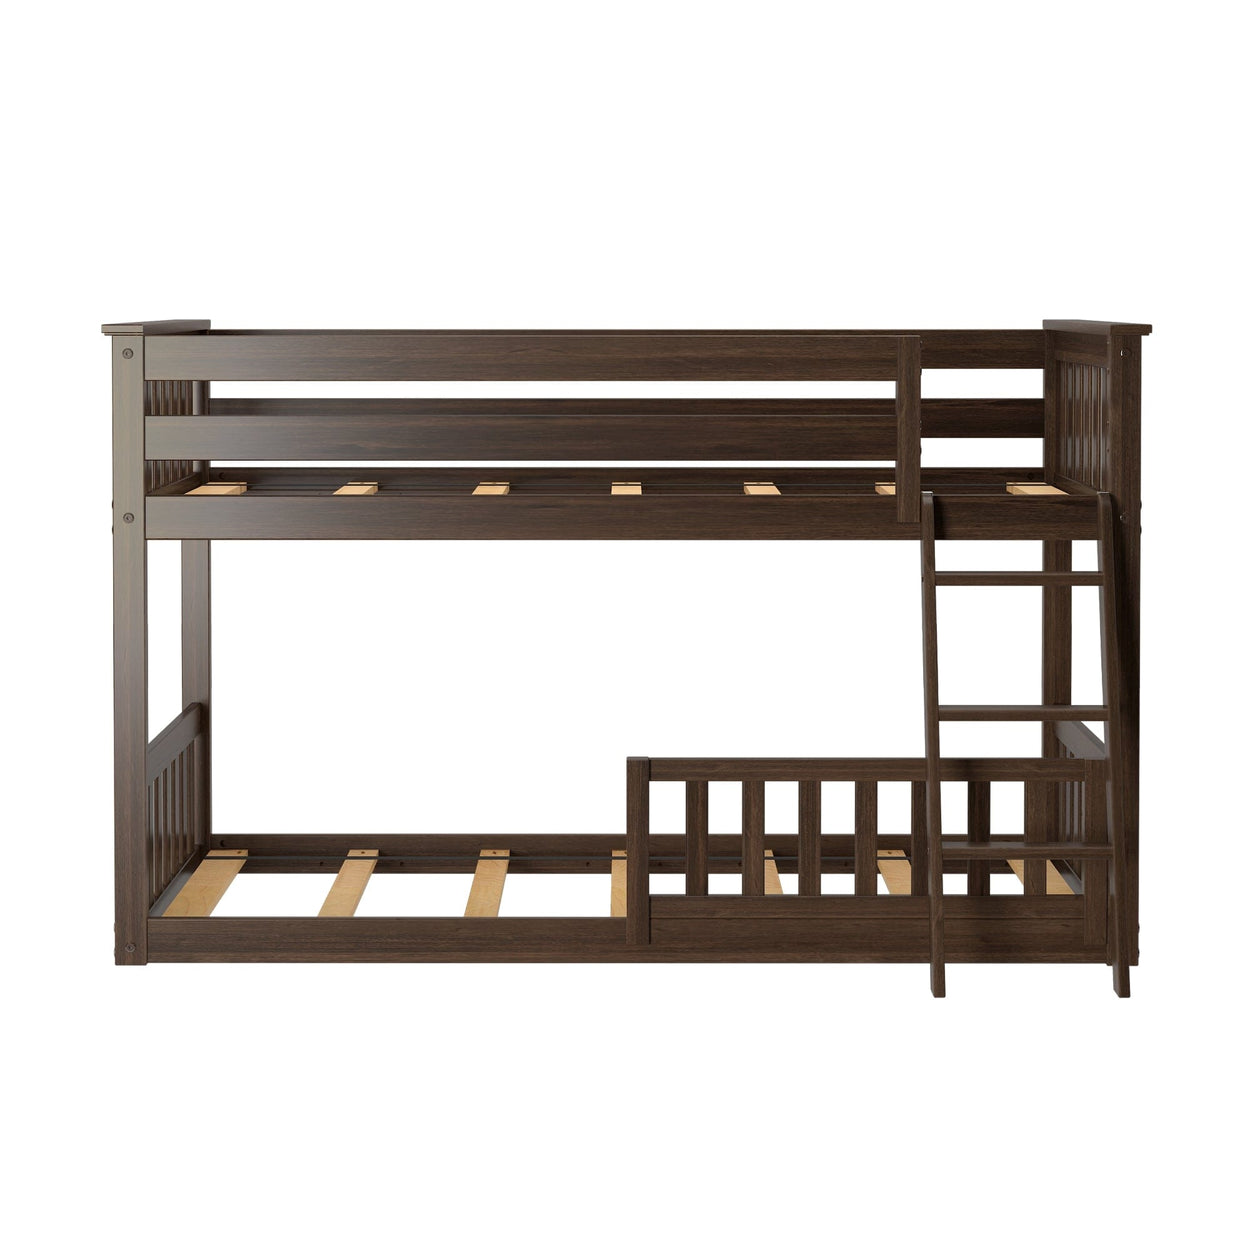 180214008109 : Bunk Beds Twin over Twin Low Bunk with Single Guard Rail, Walnut